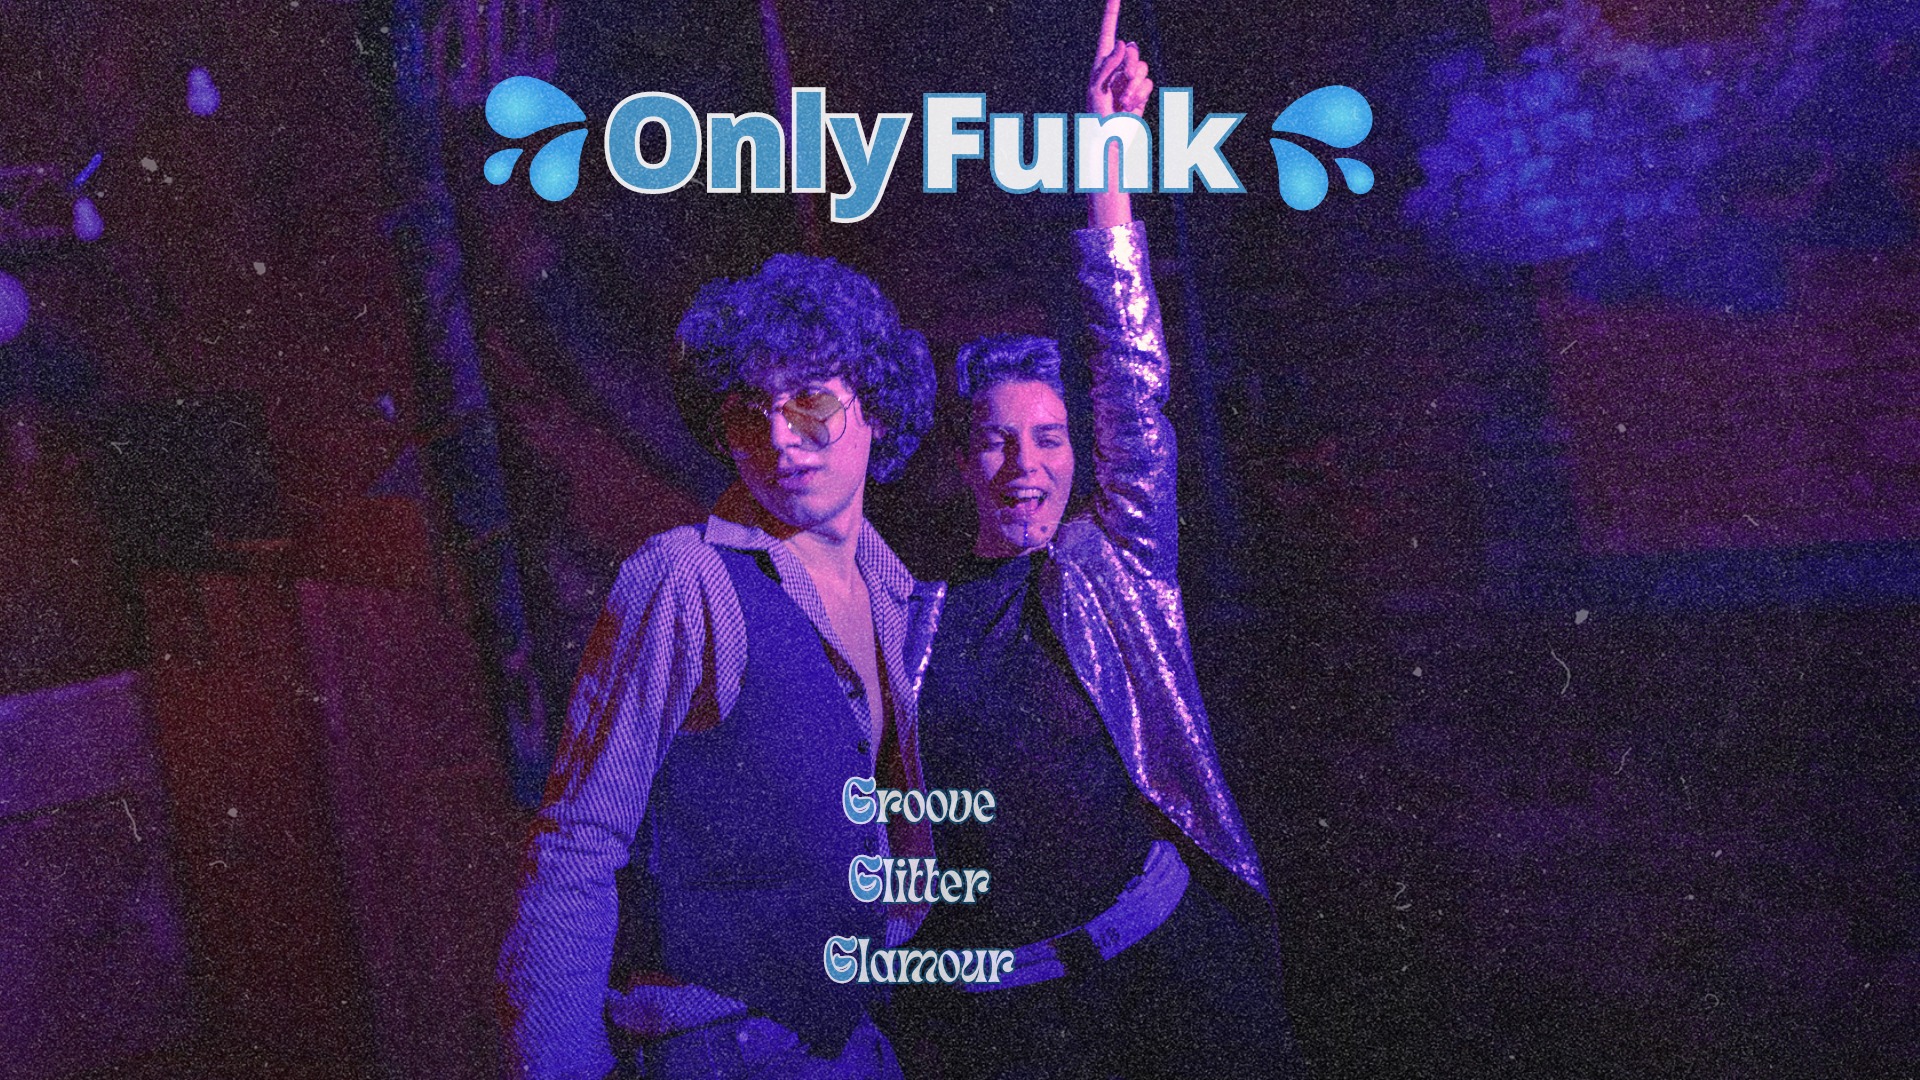 ONLY FUNK